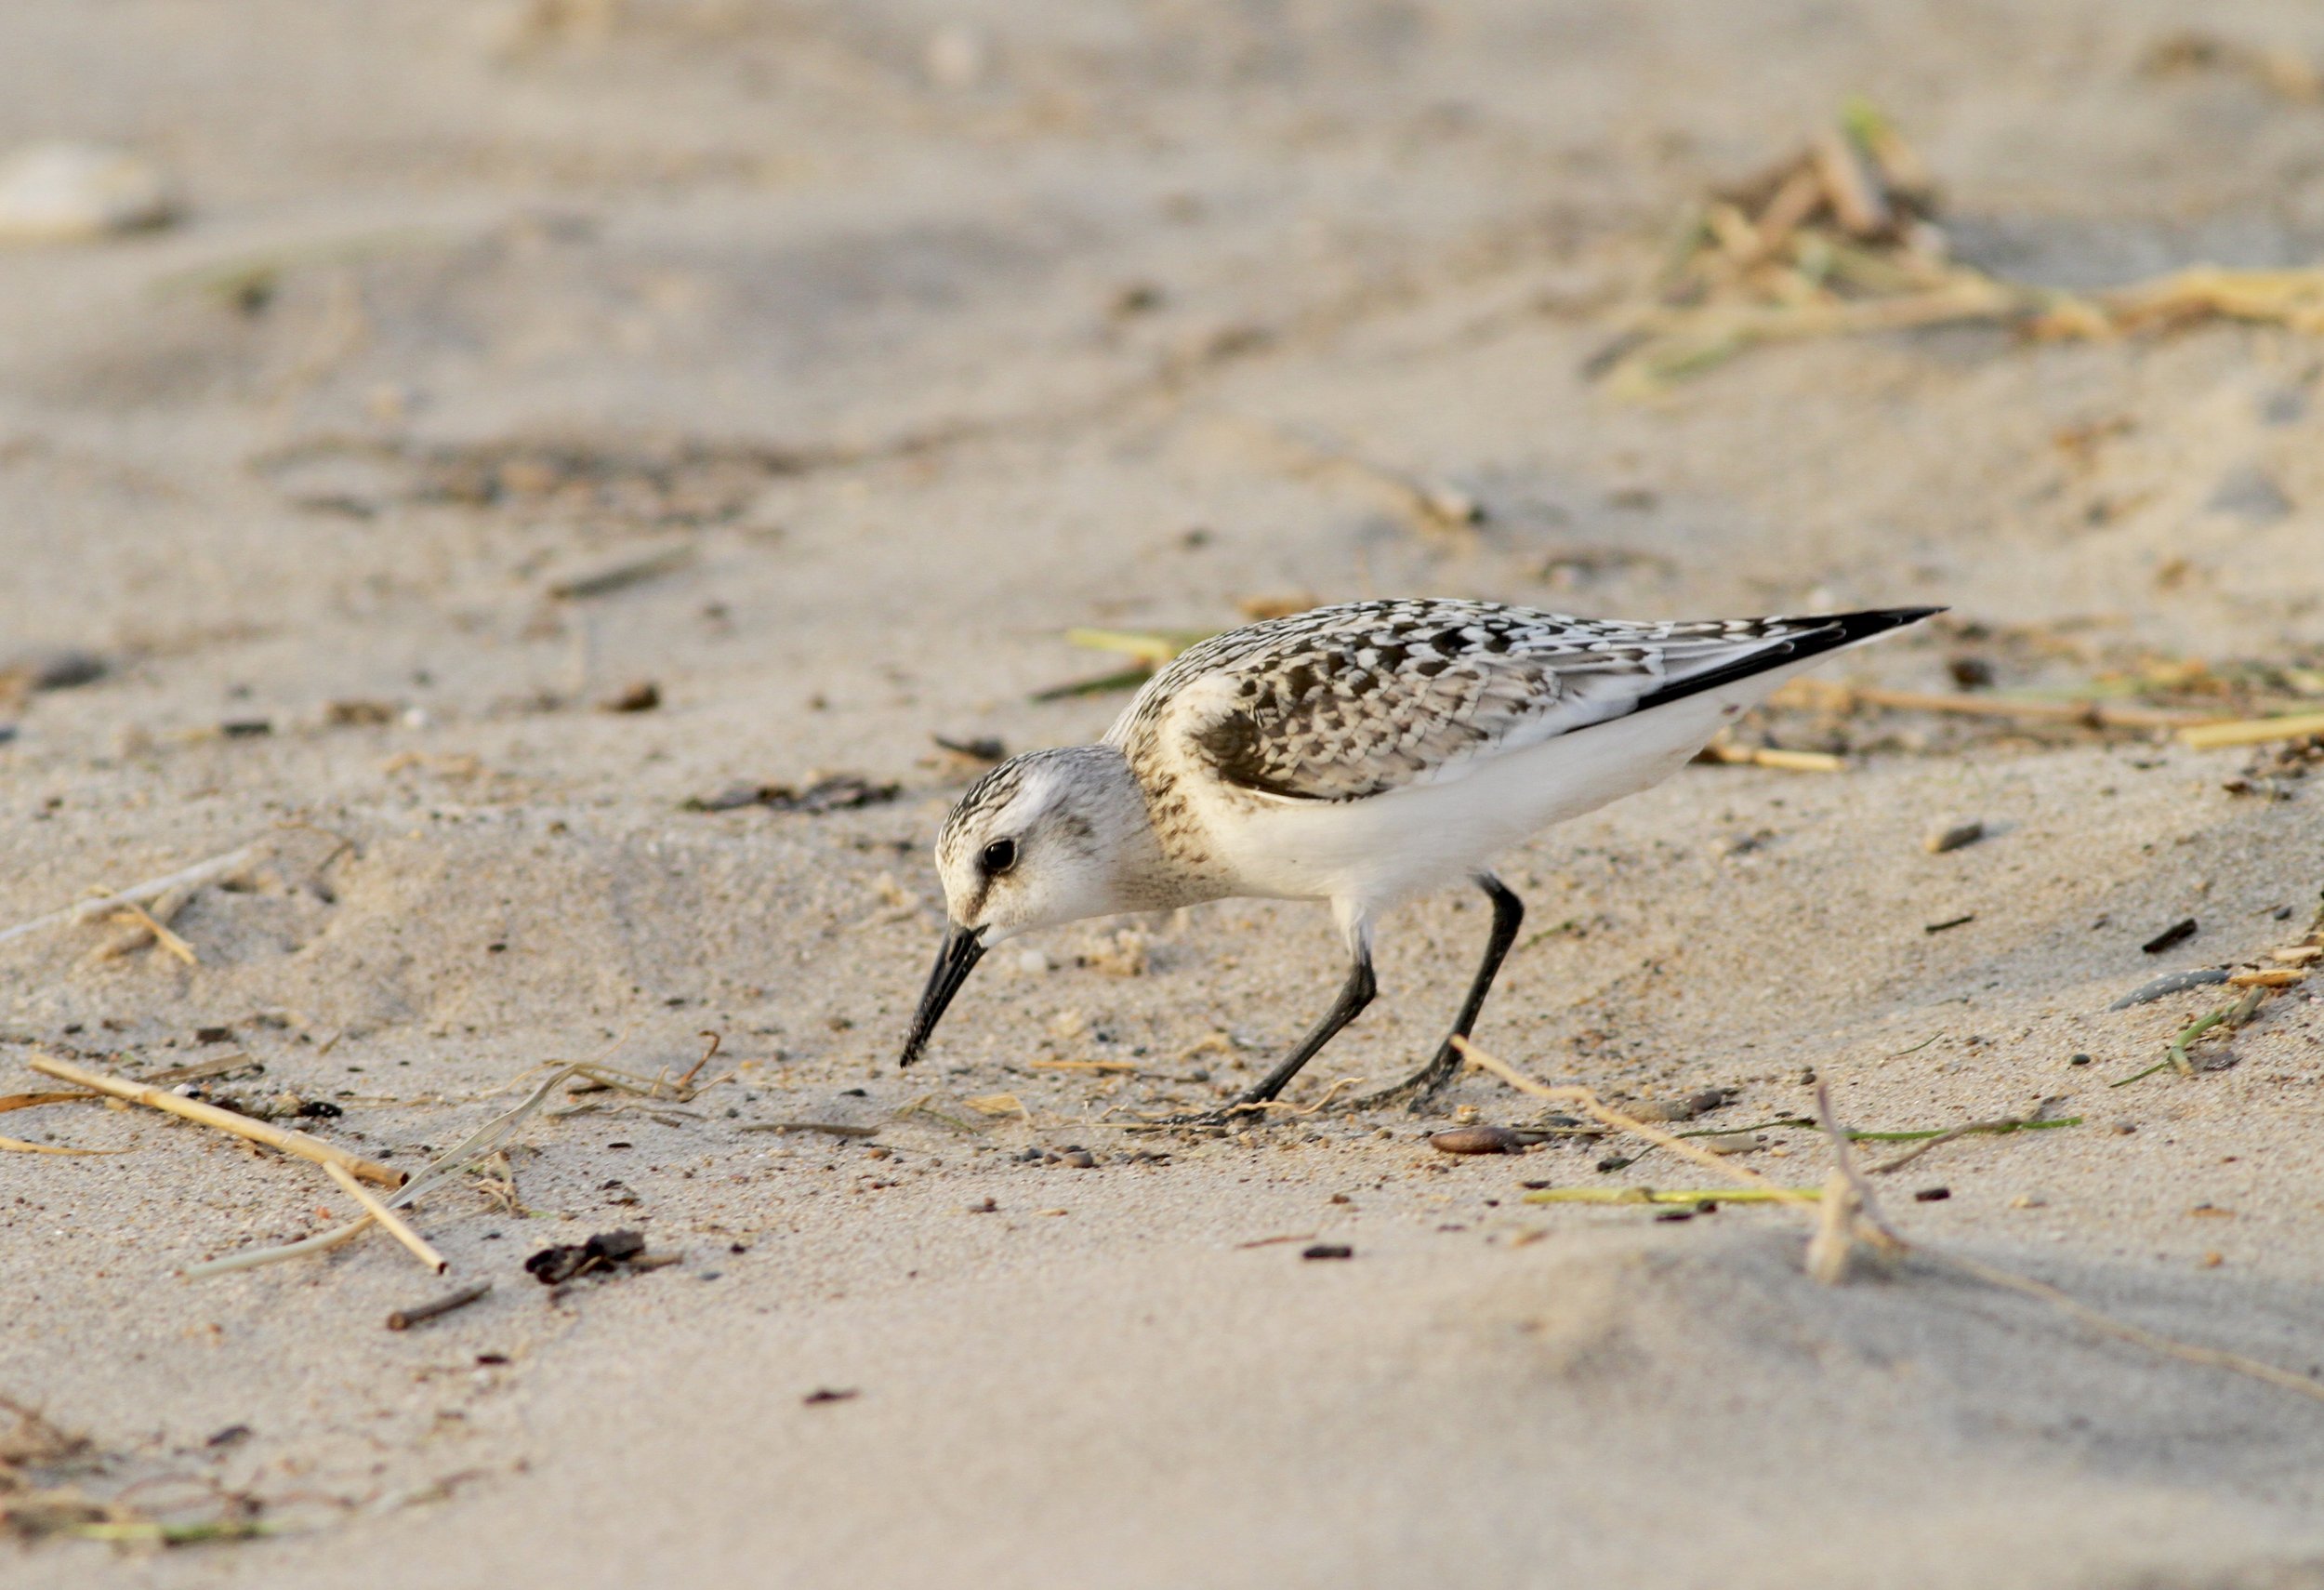 We will check the Superior lakeshore for migrants like this Sanderling